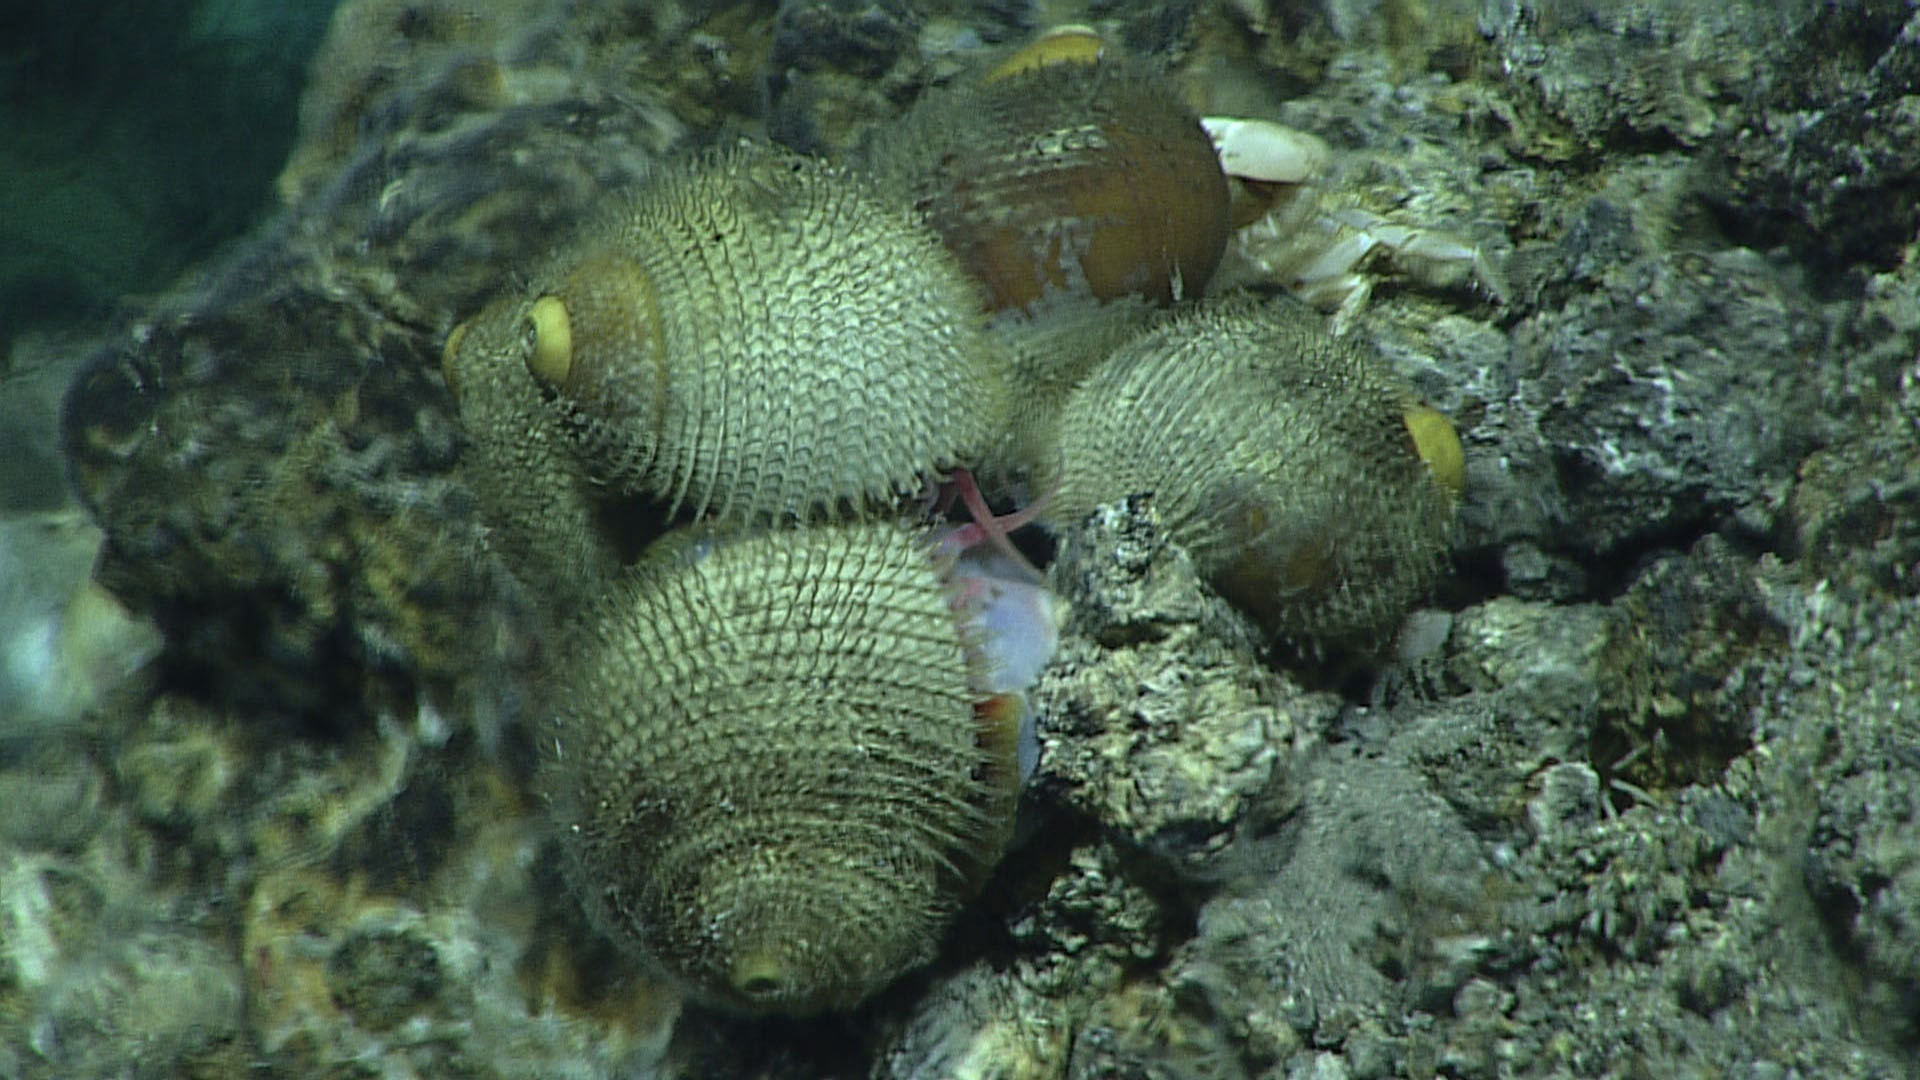 These 'hairy snails' are almost always associated with seafloor hydrothermal activity in the Mariana region of the Pacific Ocean. These snails graze upon bacteria that produce food via chemosynthesis.